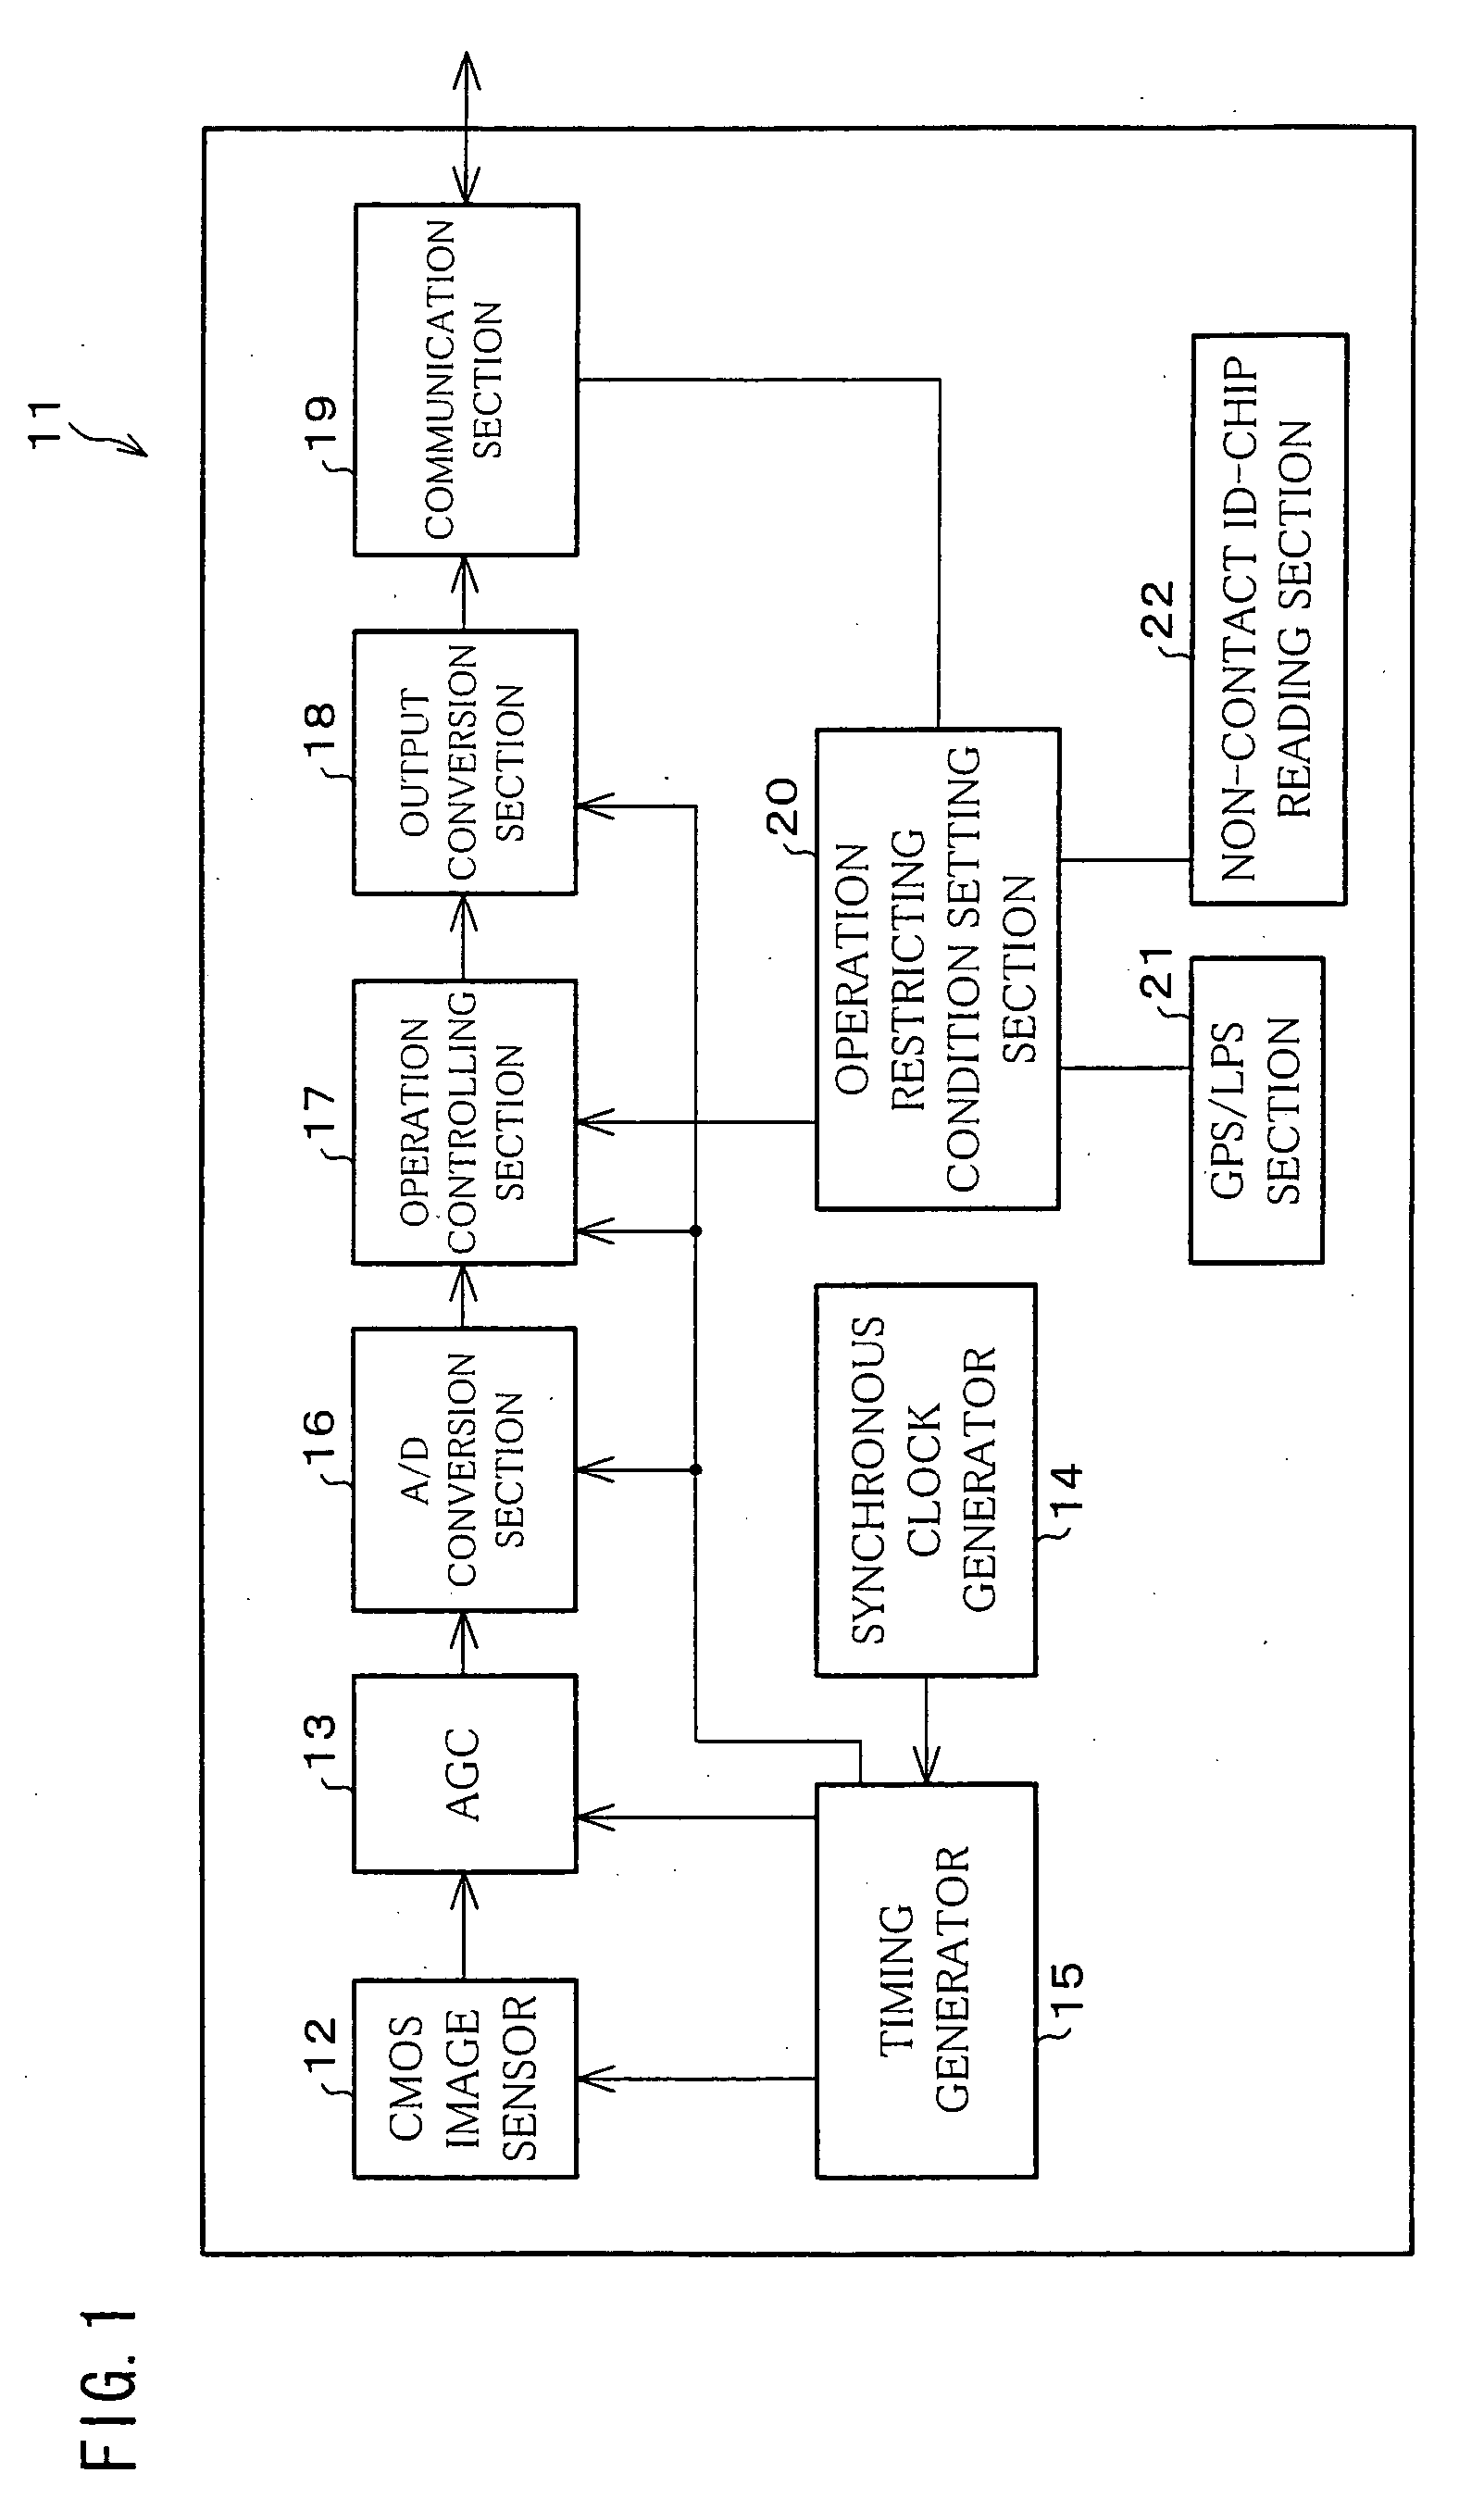 Imaging apparatus, imaging system, imaging apparatus control method and control program, and recording medium in which the same program has been recorded